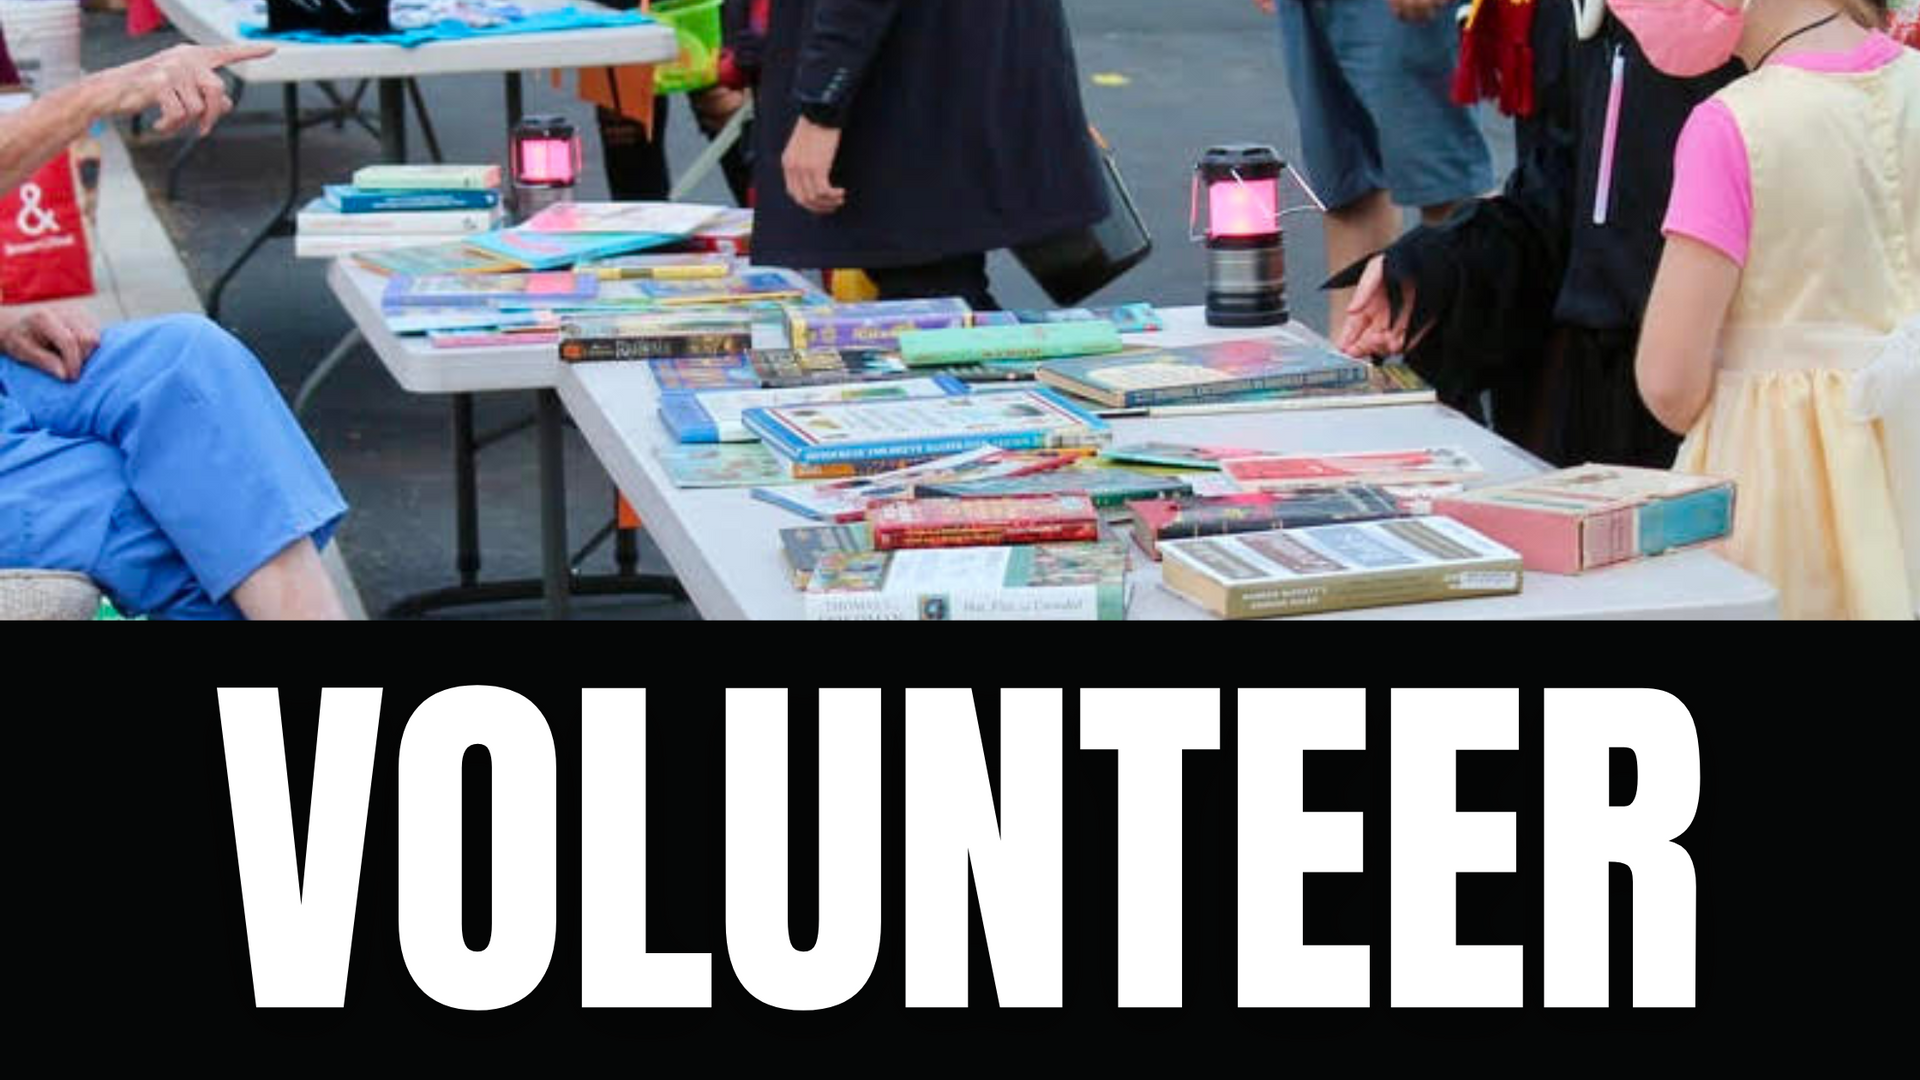 Get involved by exchanging books at Graphics You Can Trust, volunteering in various capacities, or amplifying the cause through word-of-mouth and social media shares.